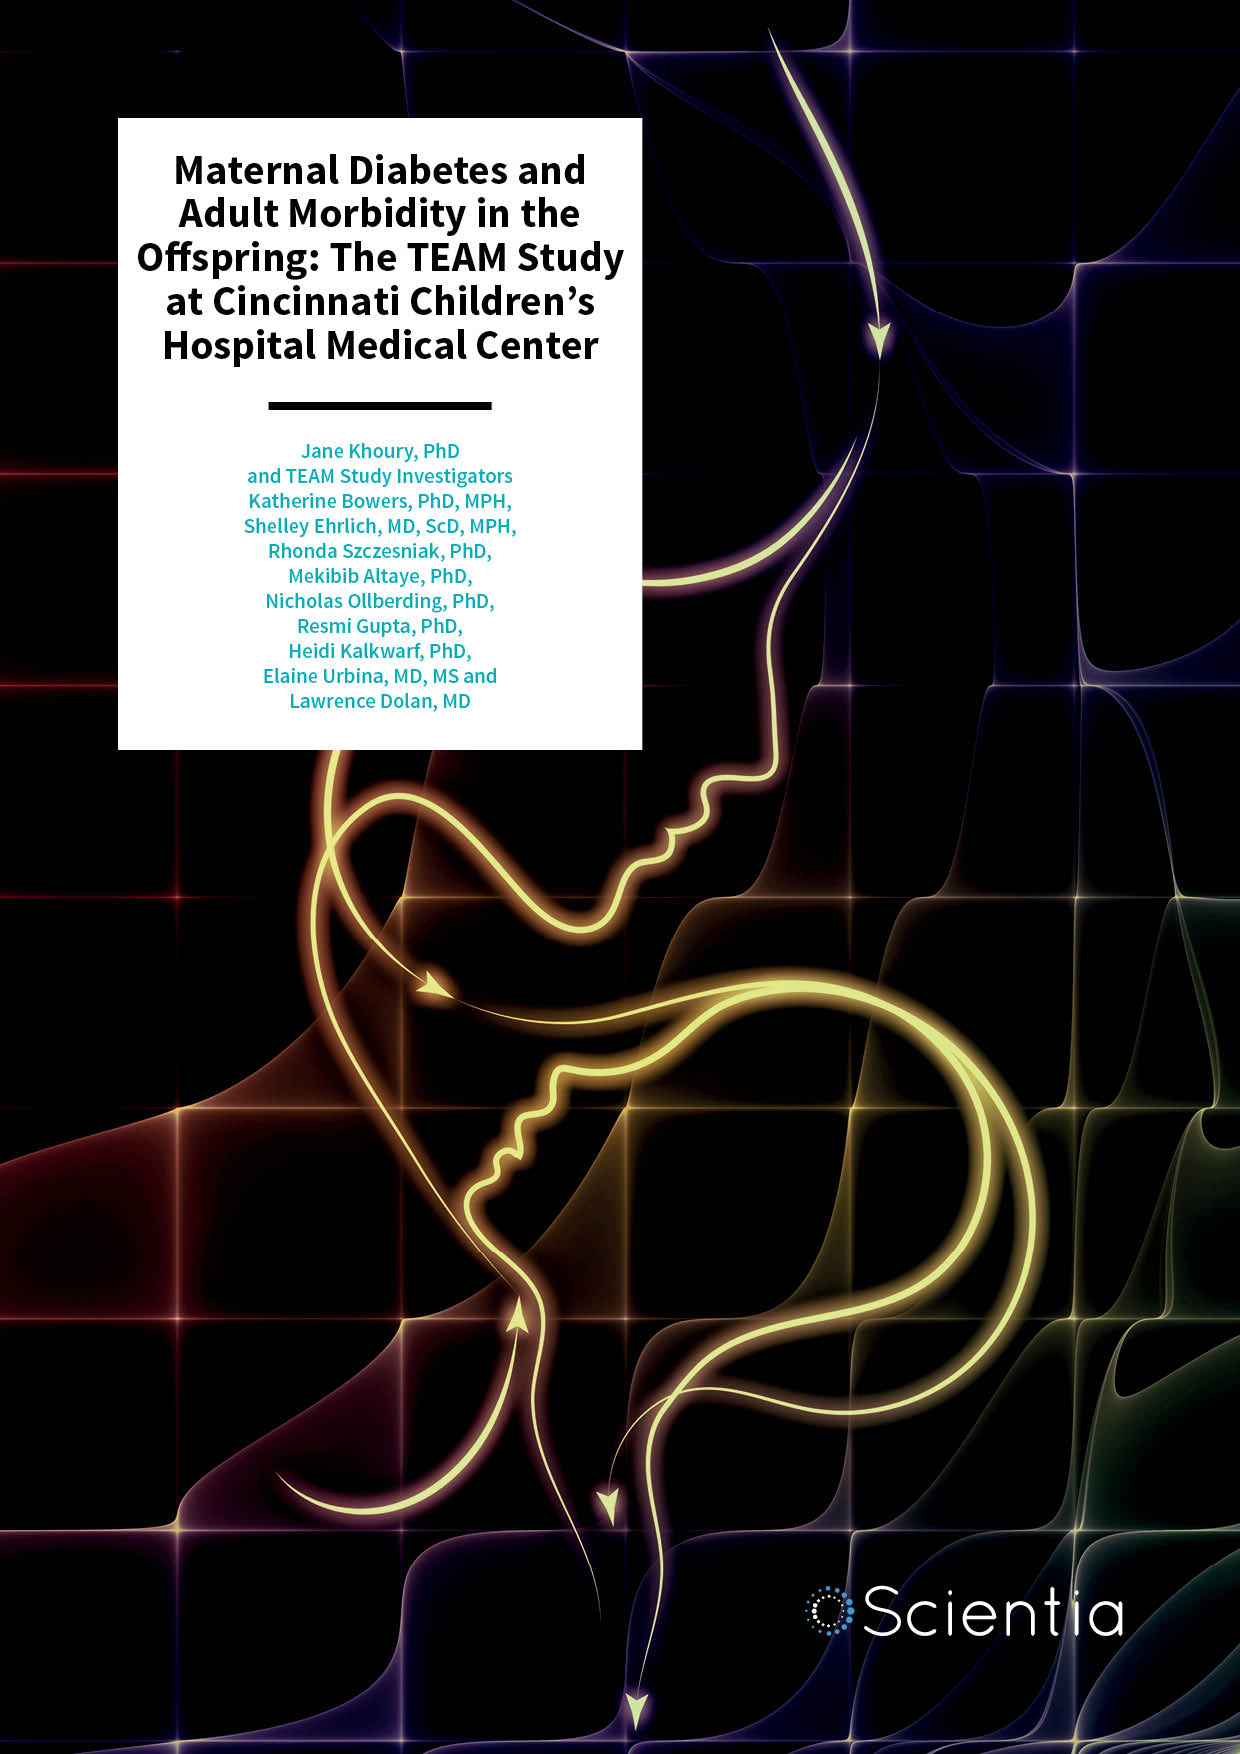 Maternal Diabetes and Adult Morbidity in the Offspring: The Team Study at Cincinnati Children’s Hospital Medical Center